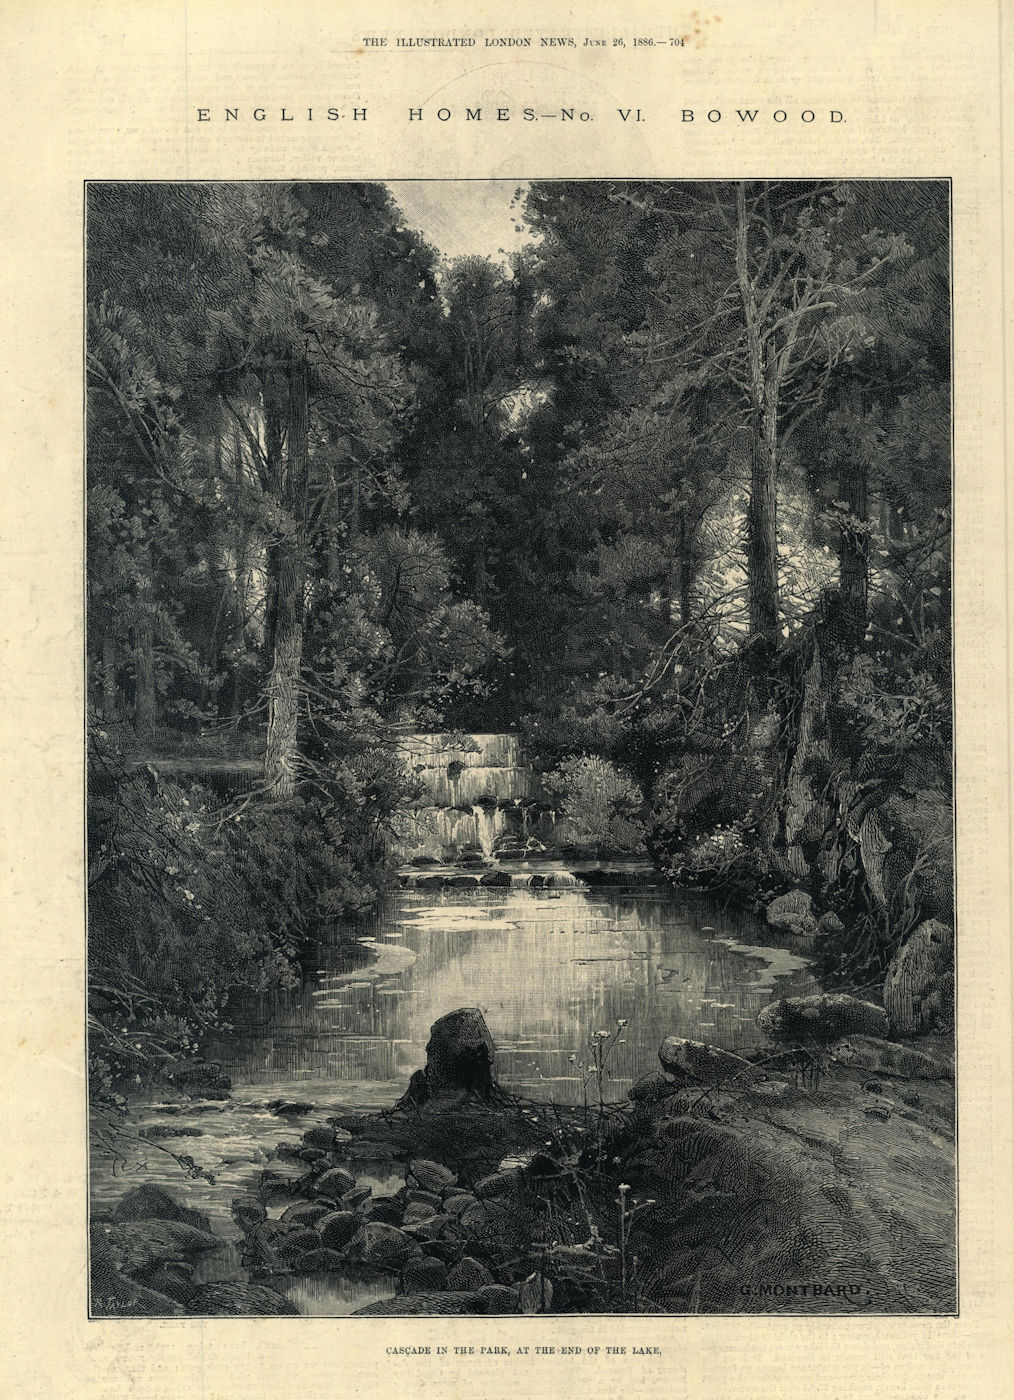 Associate Product Bowood: Cascade in the park, at the end of the lake. Wiltshire. Waterfalls 1886